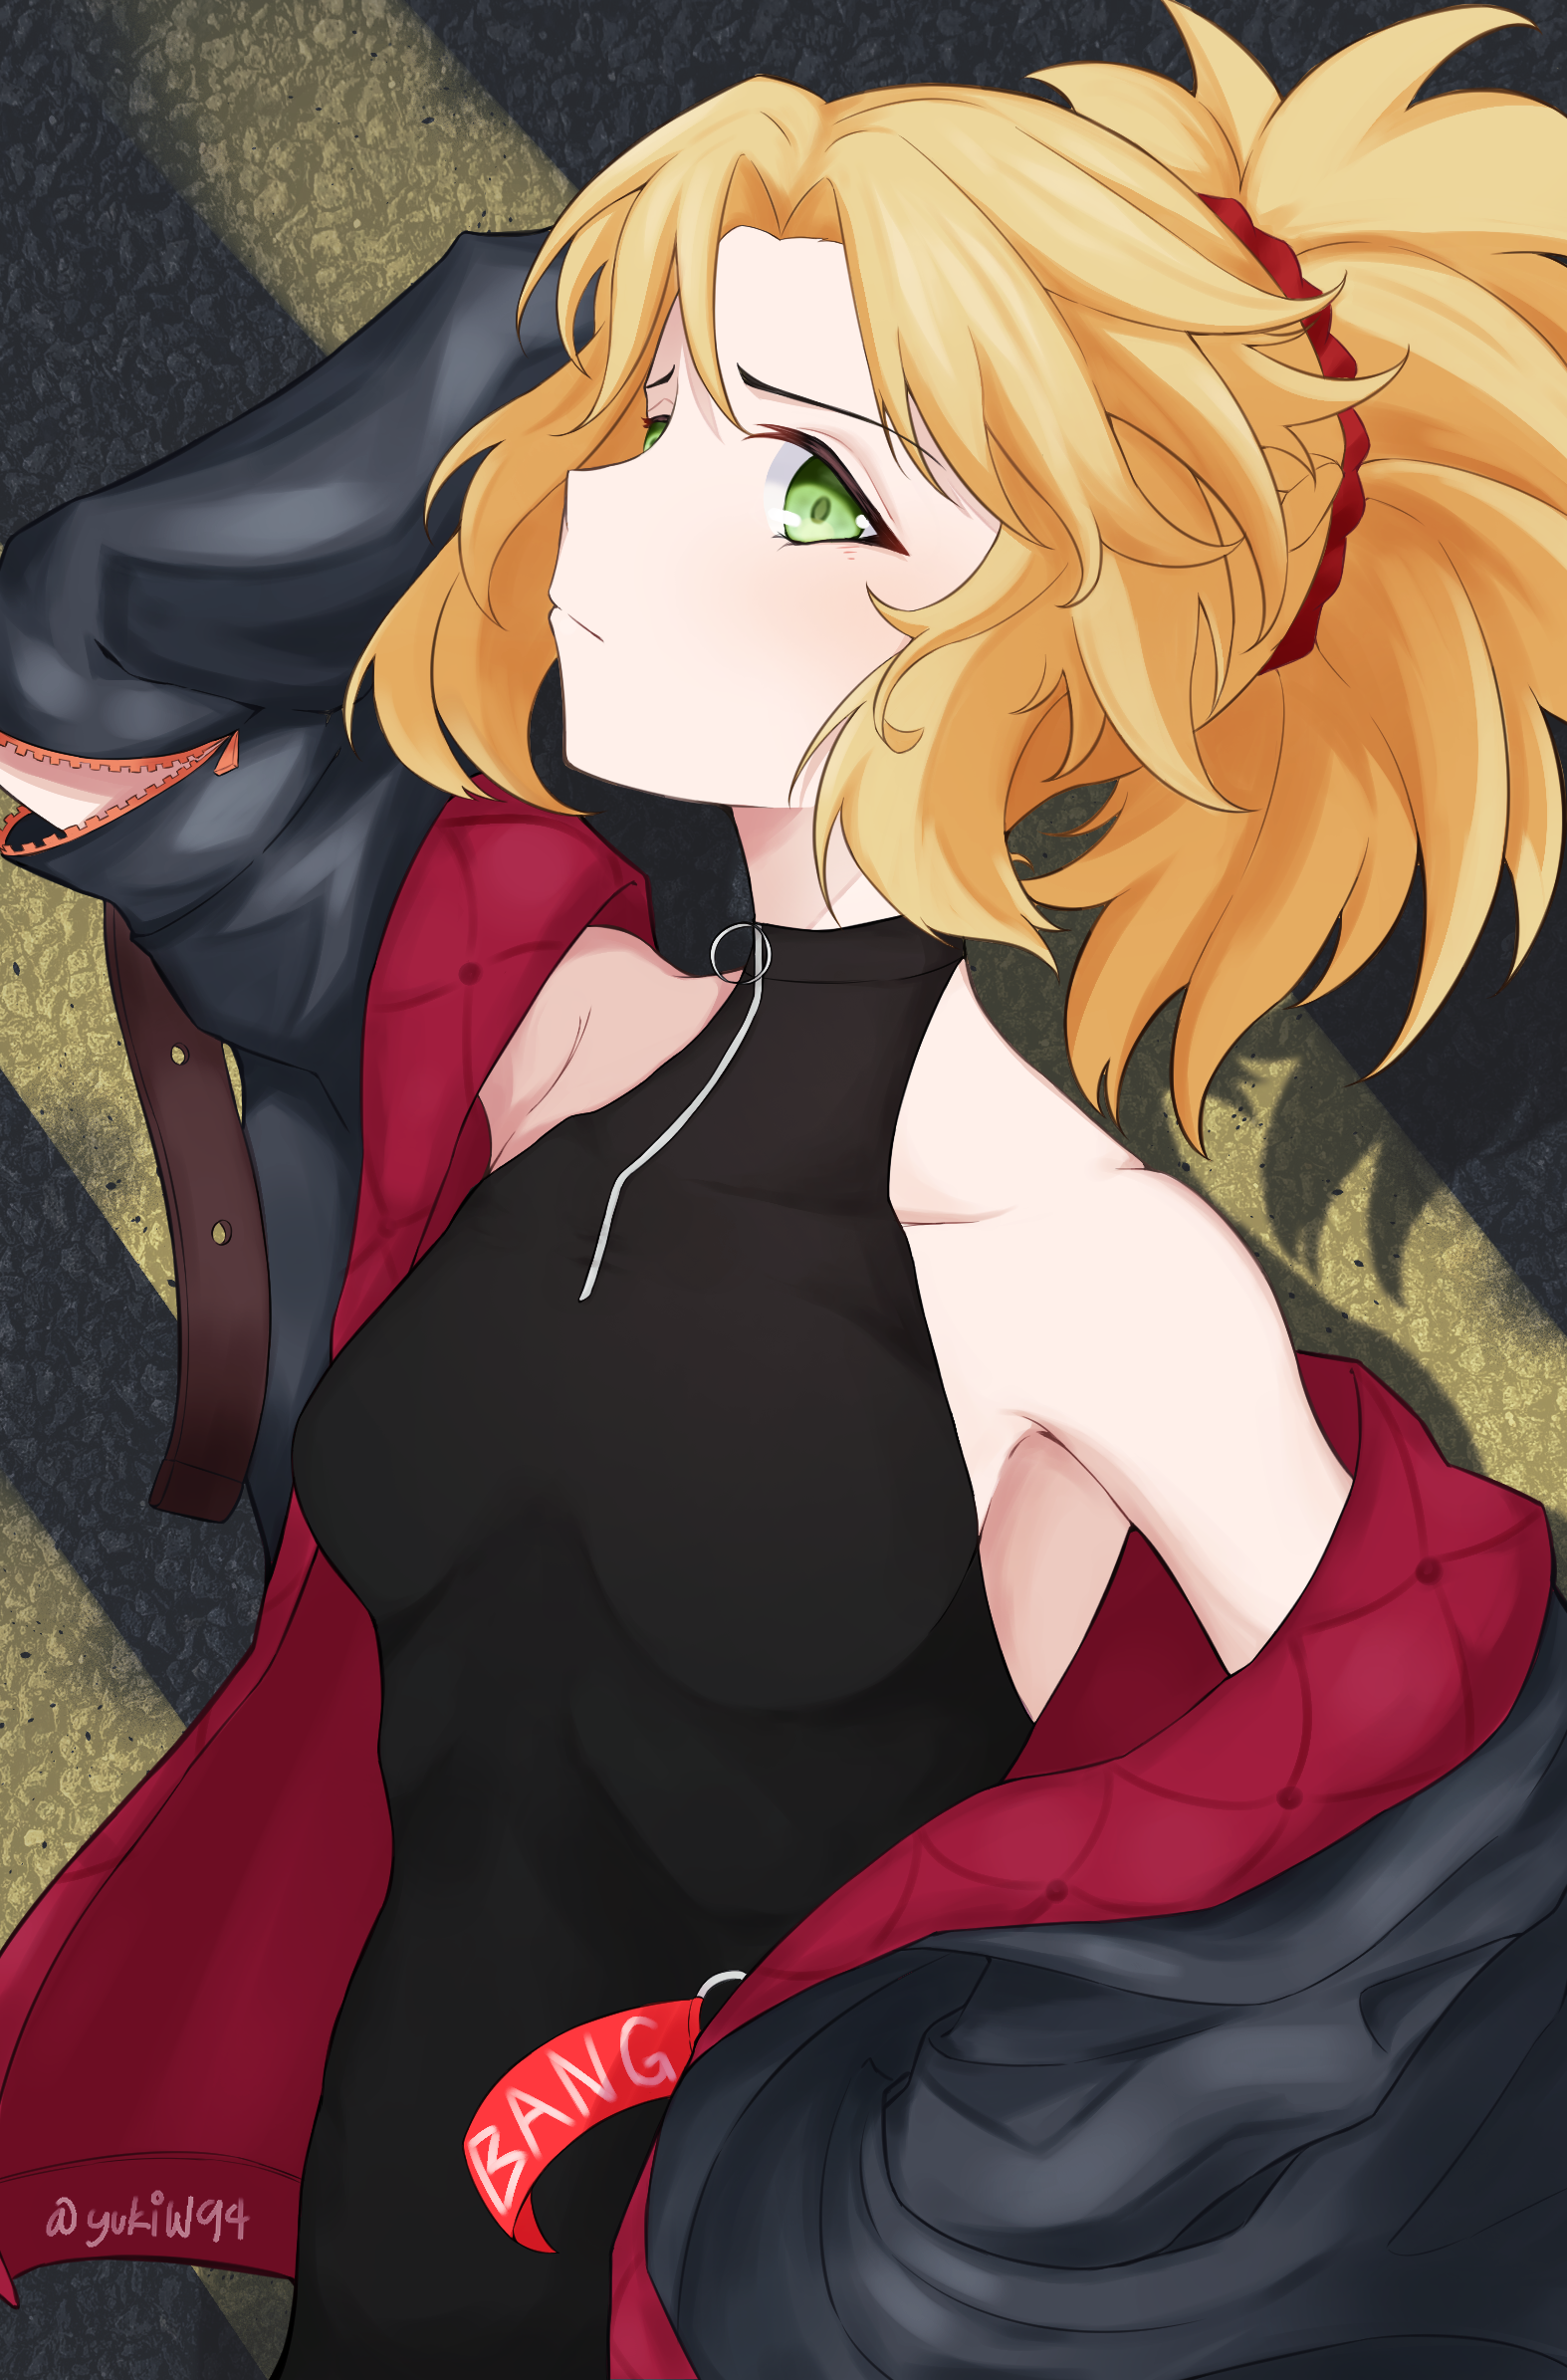 Anime 1574x2390 anime anime girls Fate series Fate/Apocrypha  Fate/Grand Order Mordred (Fate/Apocrypha) ponytail long hair blonde artwork digital art fan art